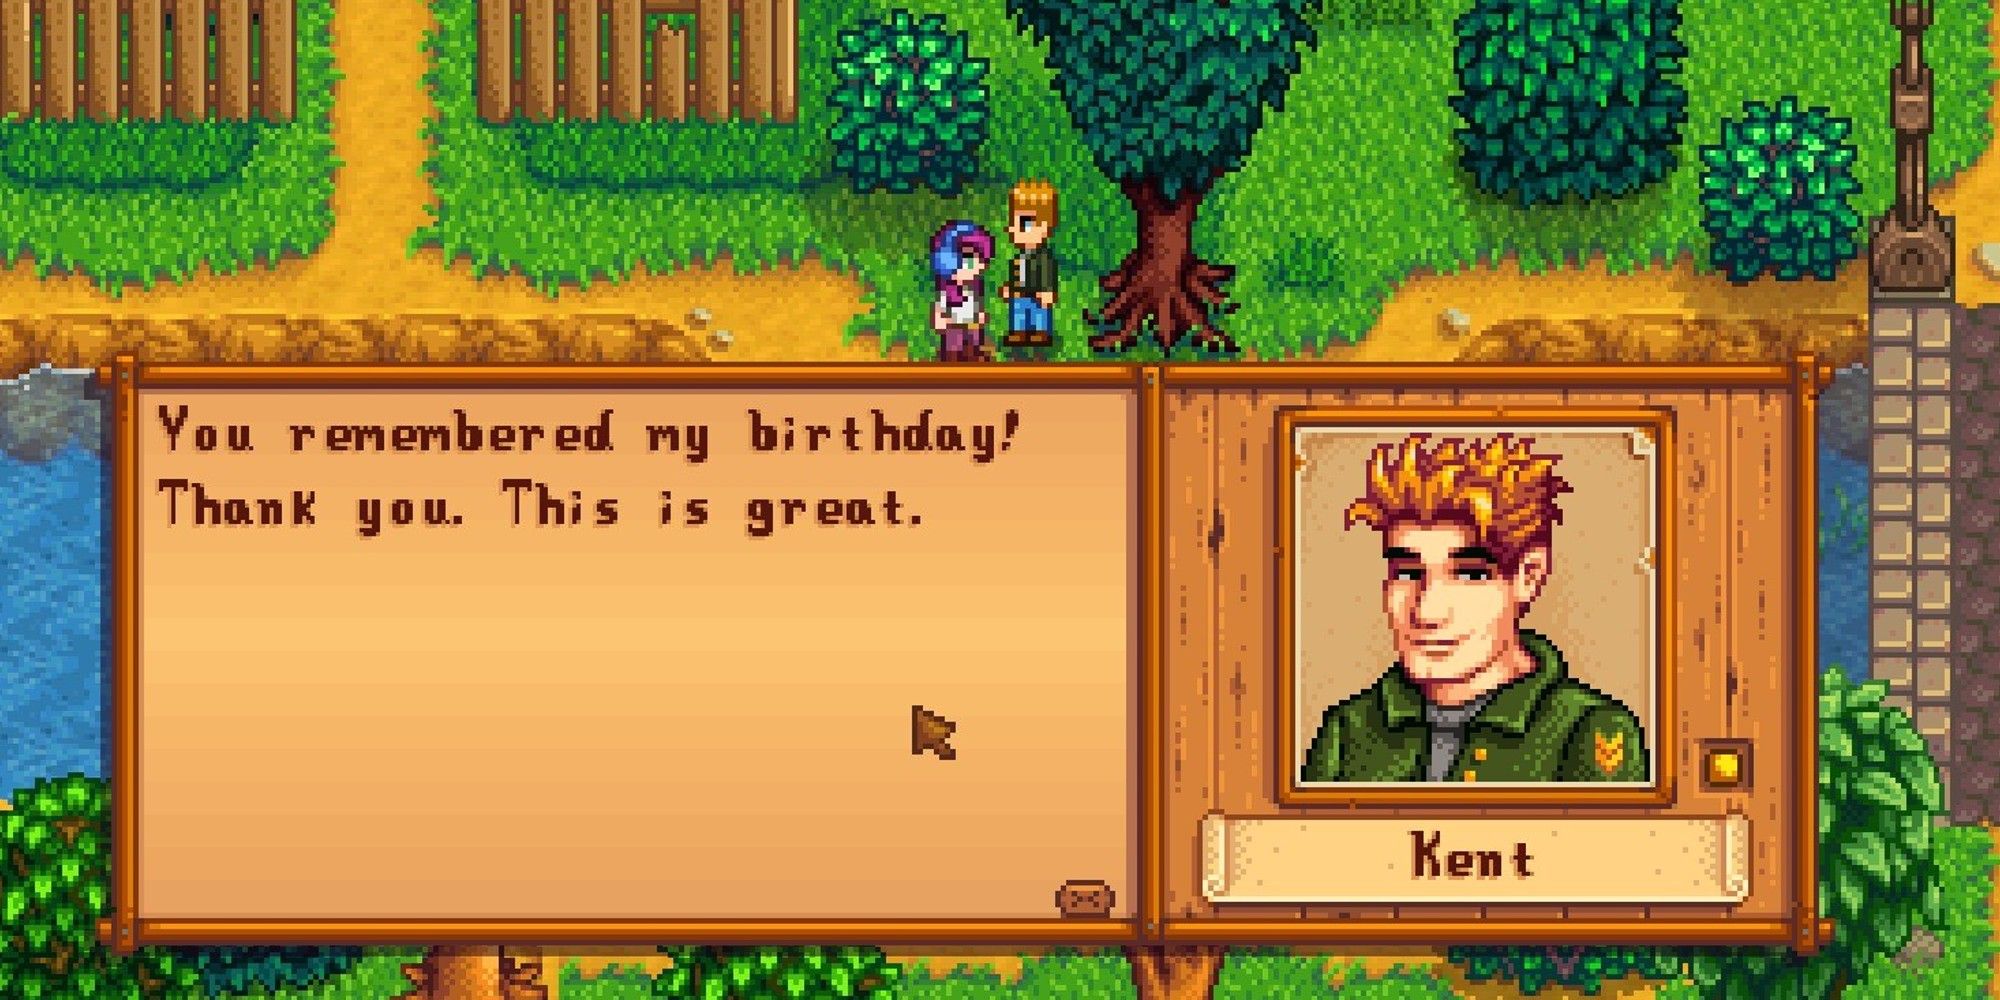 player gifting kent a birthday present in pelican town